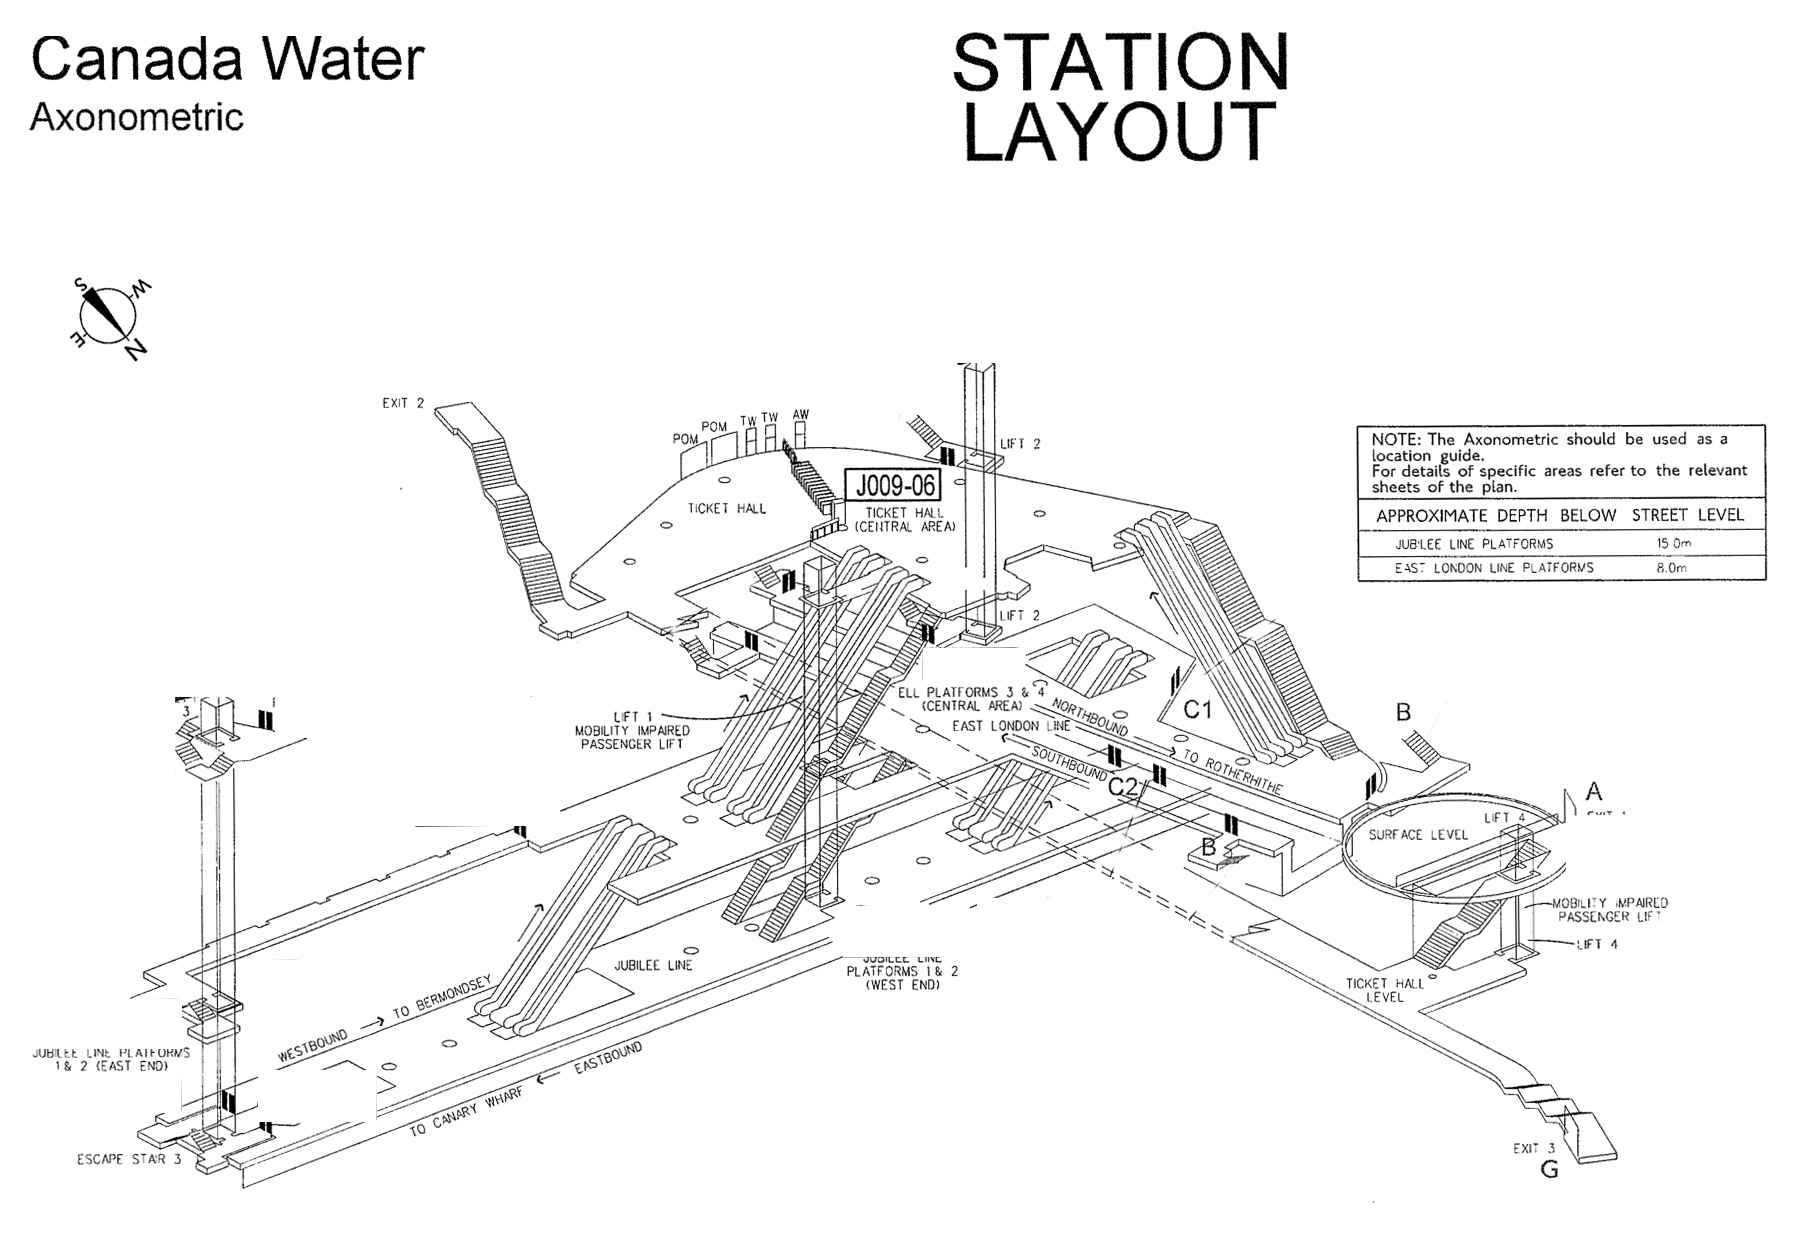 diagramme-3d-station-metro-londres-canada-water-06